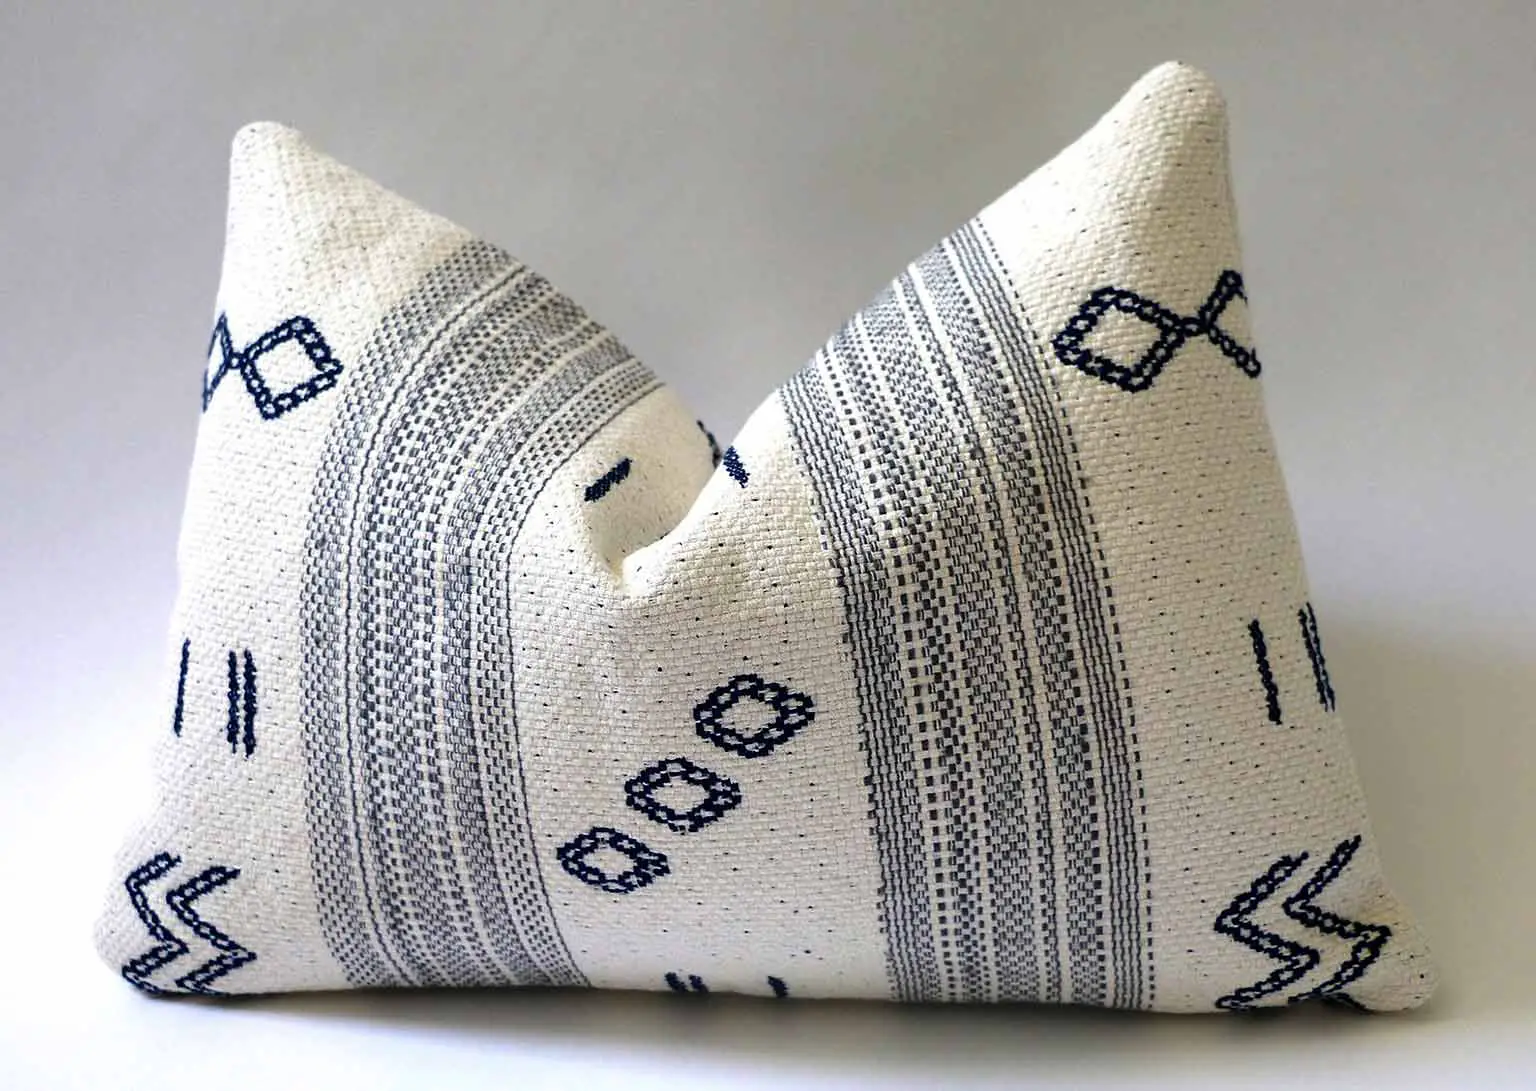 Blue and white patterned pillow